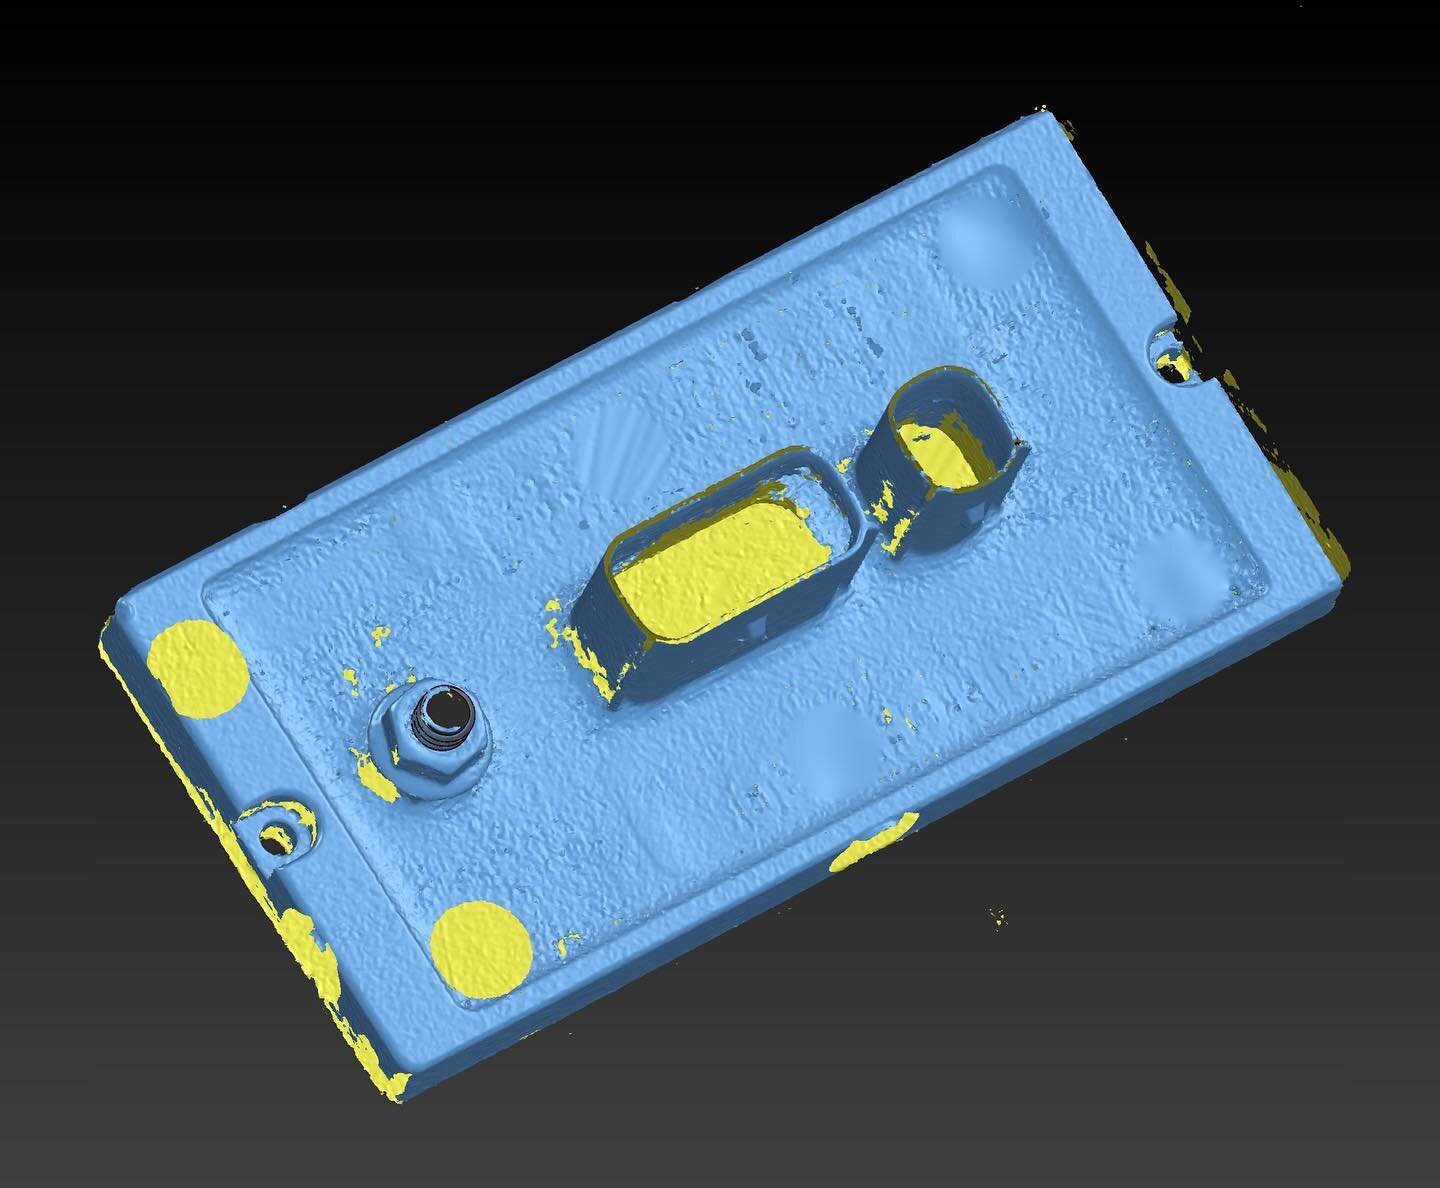 3D scan of an electrical module that will be used to create a cad model so our client can design mounting brackets for various trucks. 
.
#3dscanning #creaform #switchpros #switchpros9100 #3dlaserscanning #caddesign #laserscanning #reverseengineering